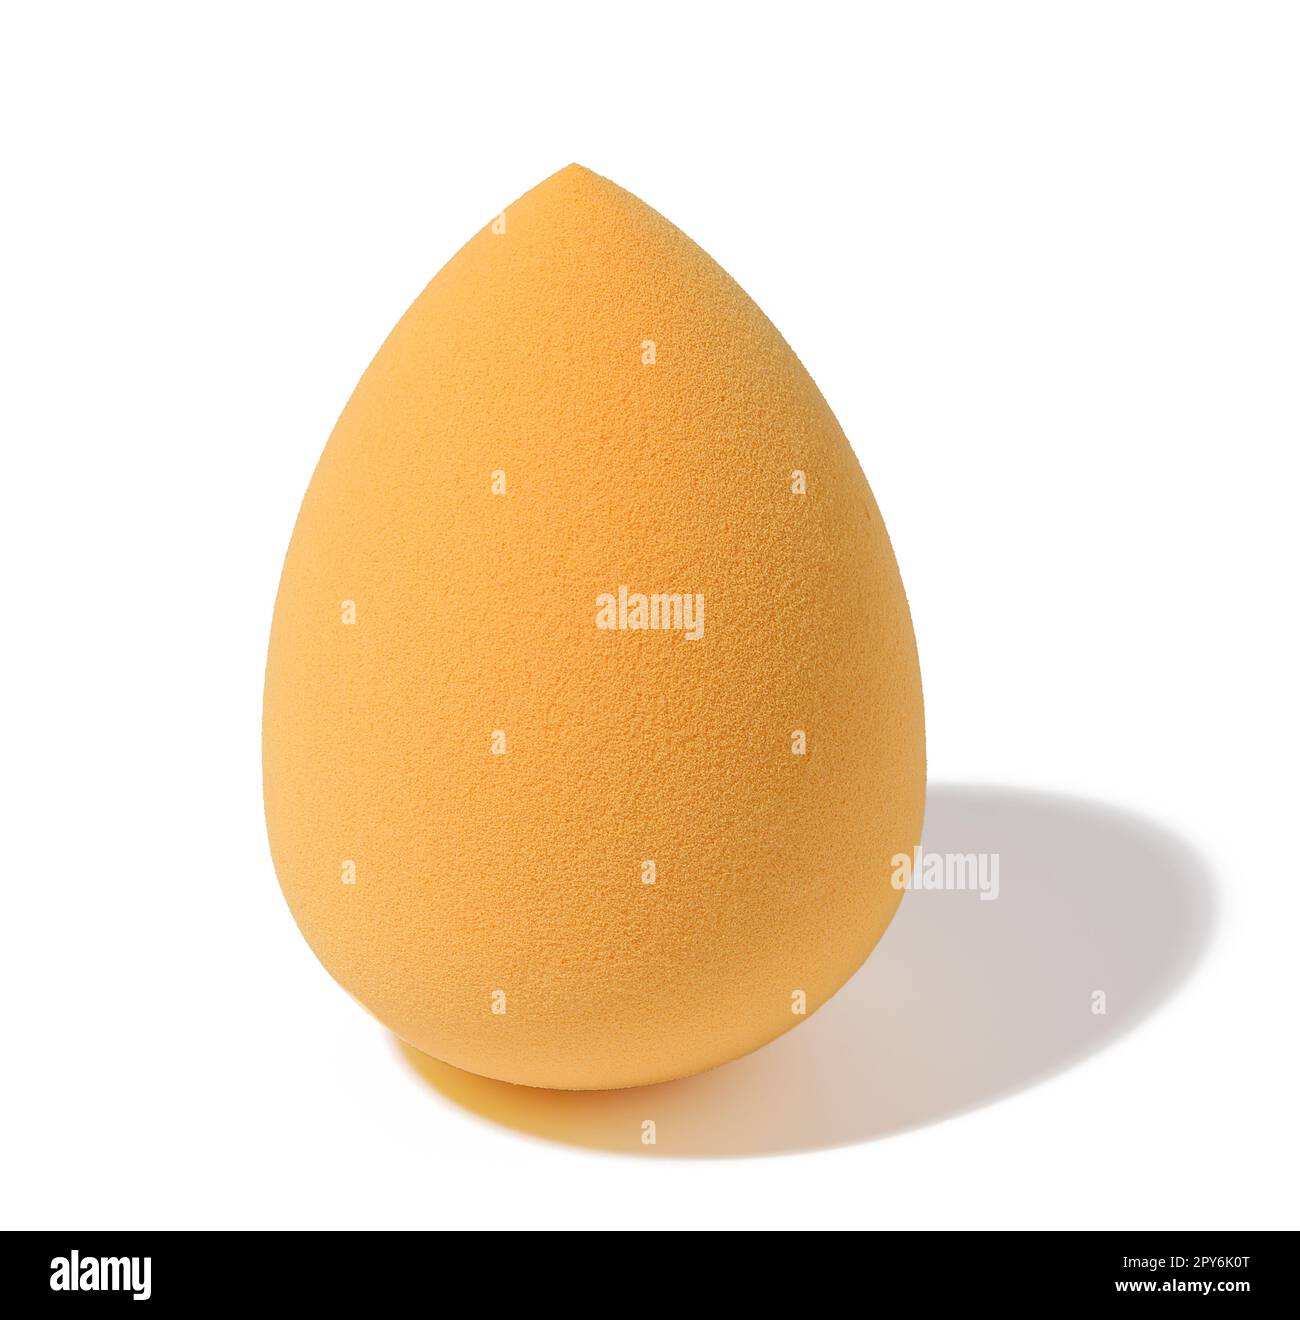 Oval new egg-shaped sponge for cosmetics and foundation Stock Photo